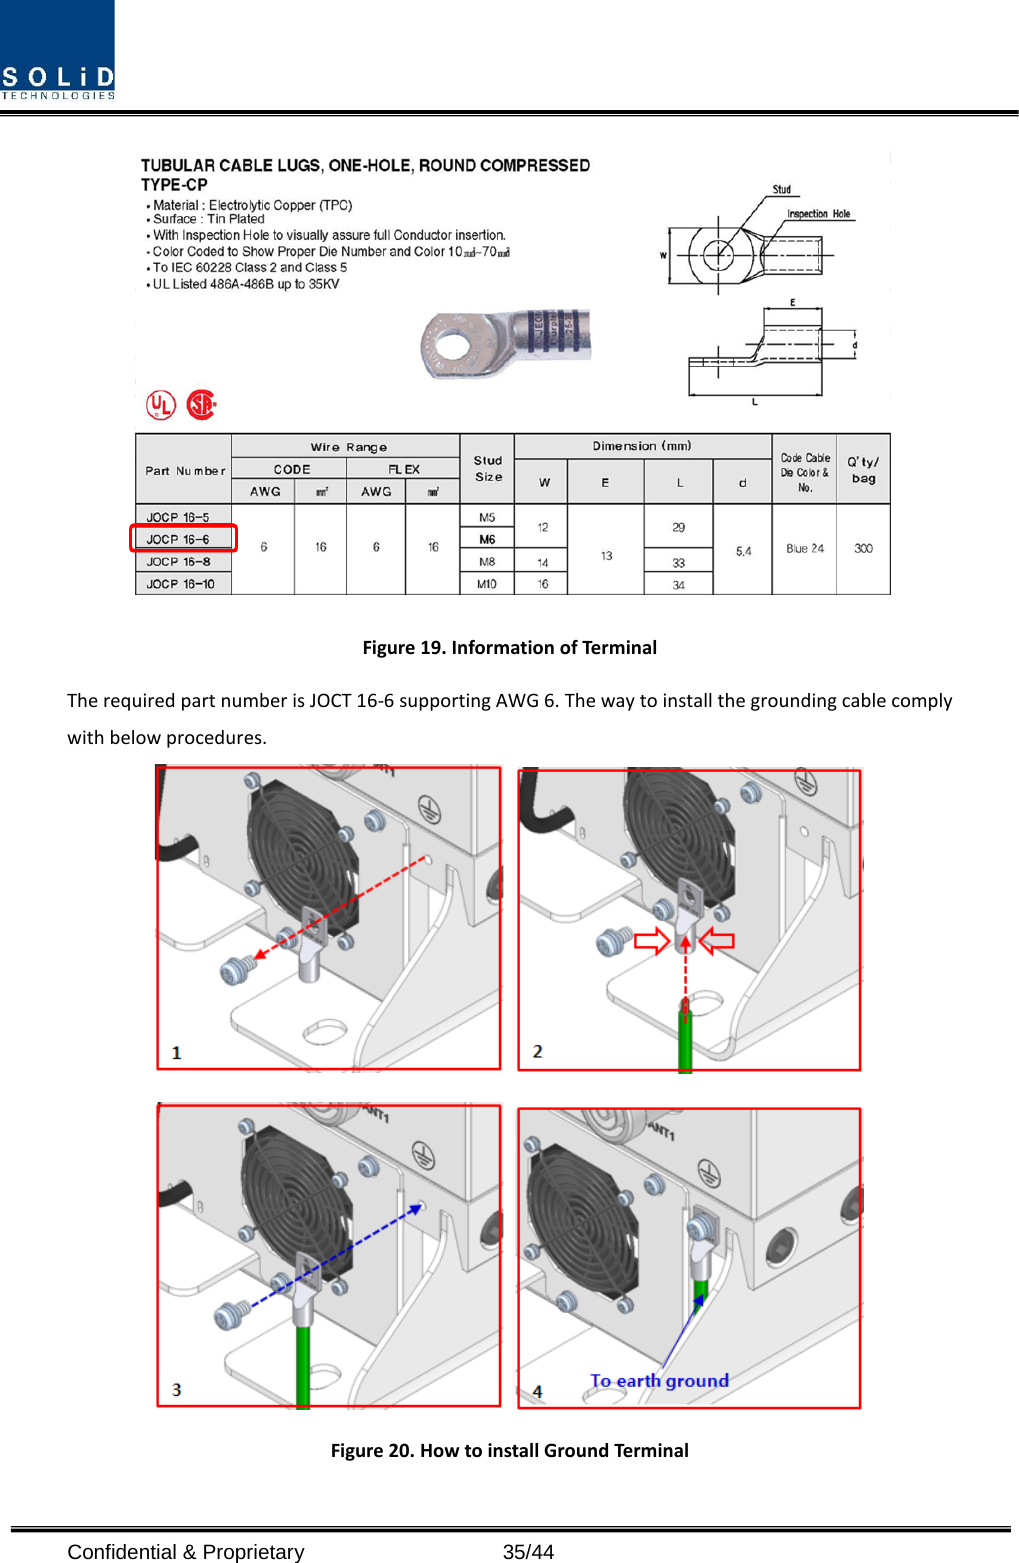  Confidential &amp; Proprietary                   35/44  Figure 19. Information of Terminal The required part number is JOCT 16-6 supporting AWG 6. The way to install the grounding cable comply with below procedures.     Figure 20. How to install Ground Terminal  